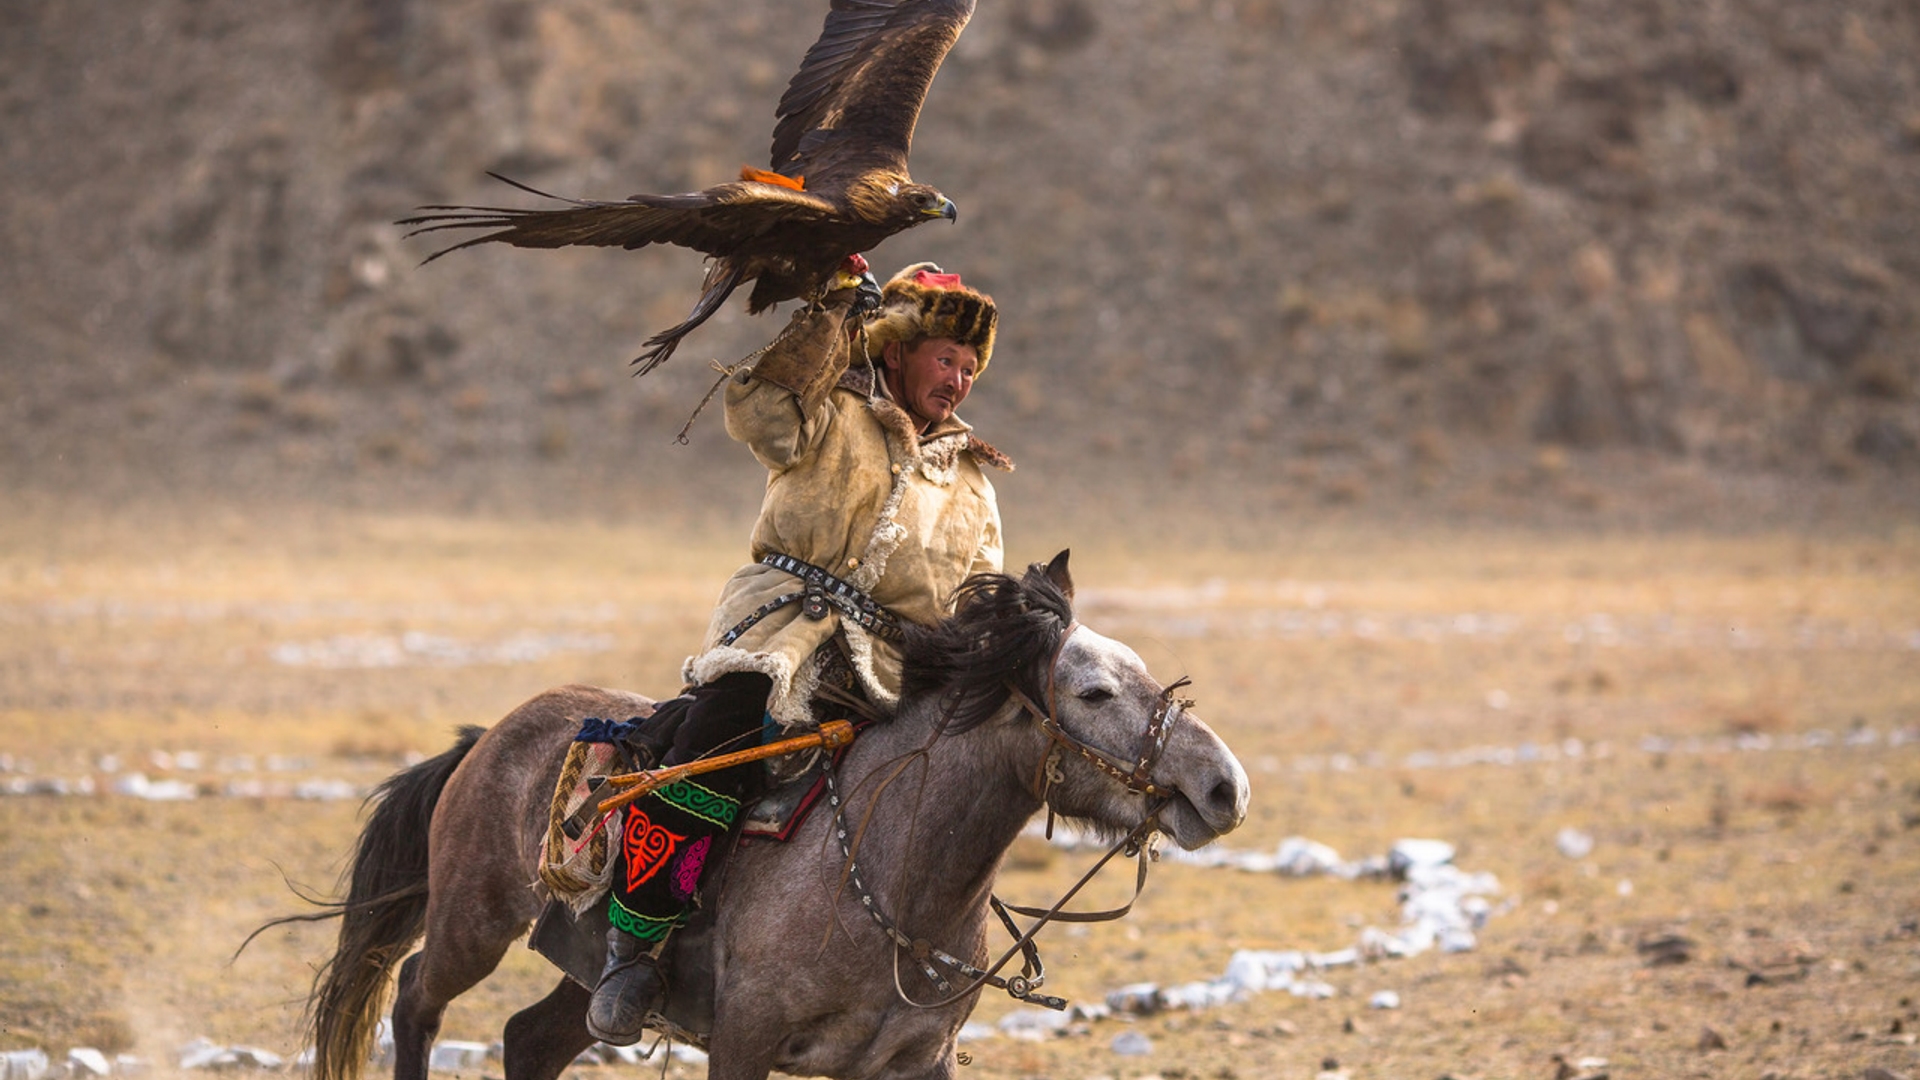 Kazakh Eagle Hunter traditional clothing, while hunting to the hare holding a golden eagle on his arm in desert mountain of Western Mongolia.